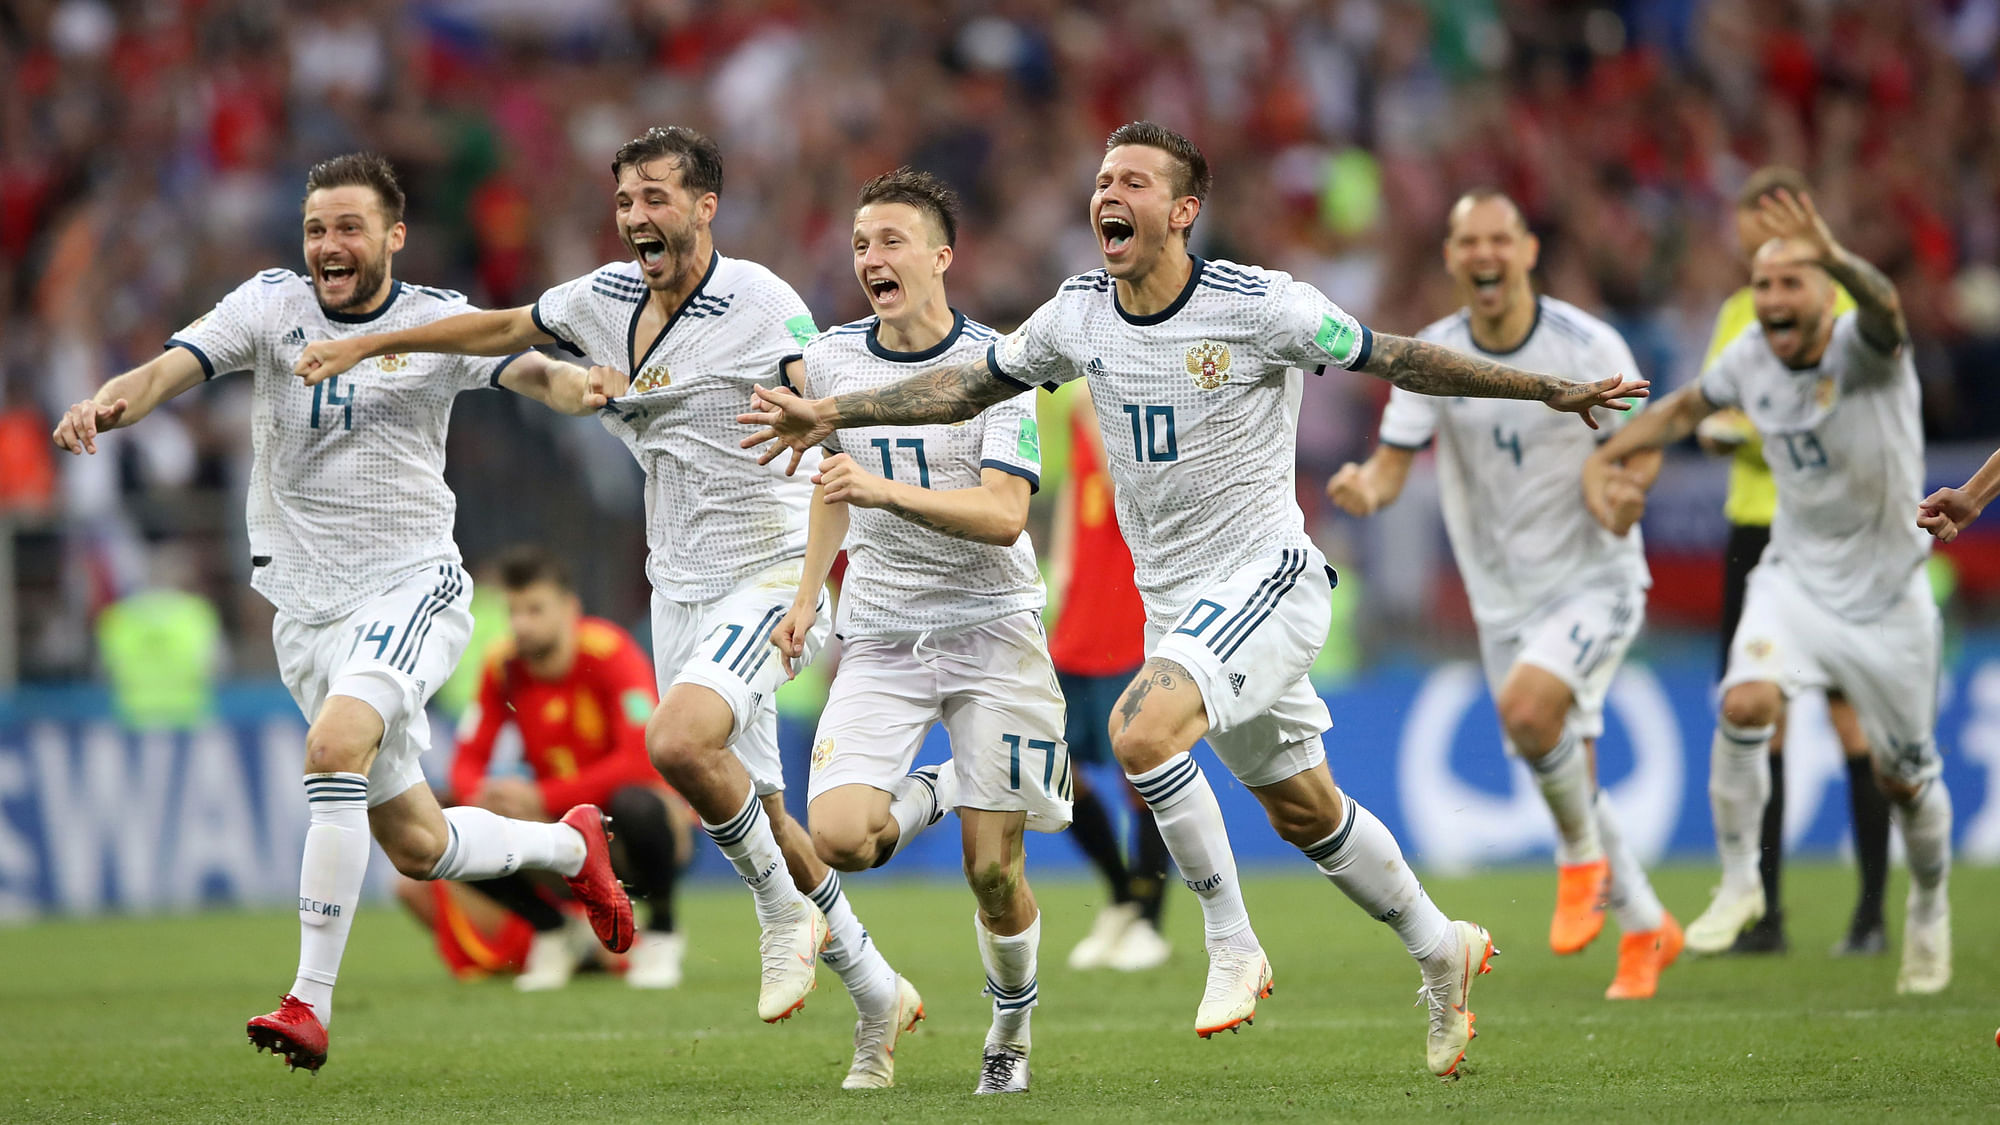 Russia players celebrate after winning the penalty shootout against Spain in the Round of 16 of the FIFA World Cup.